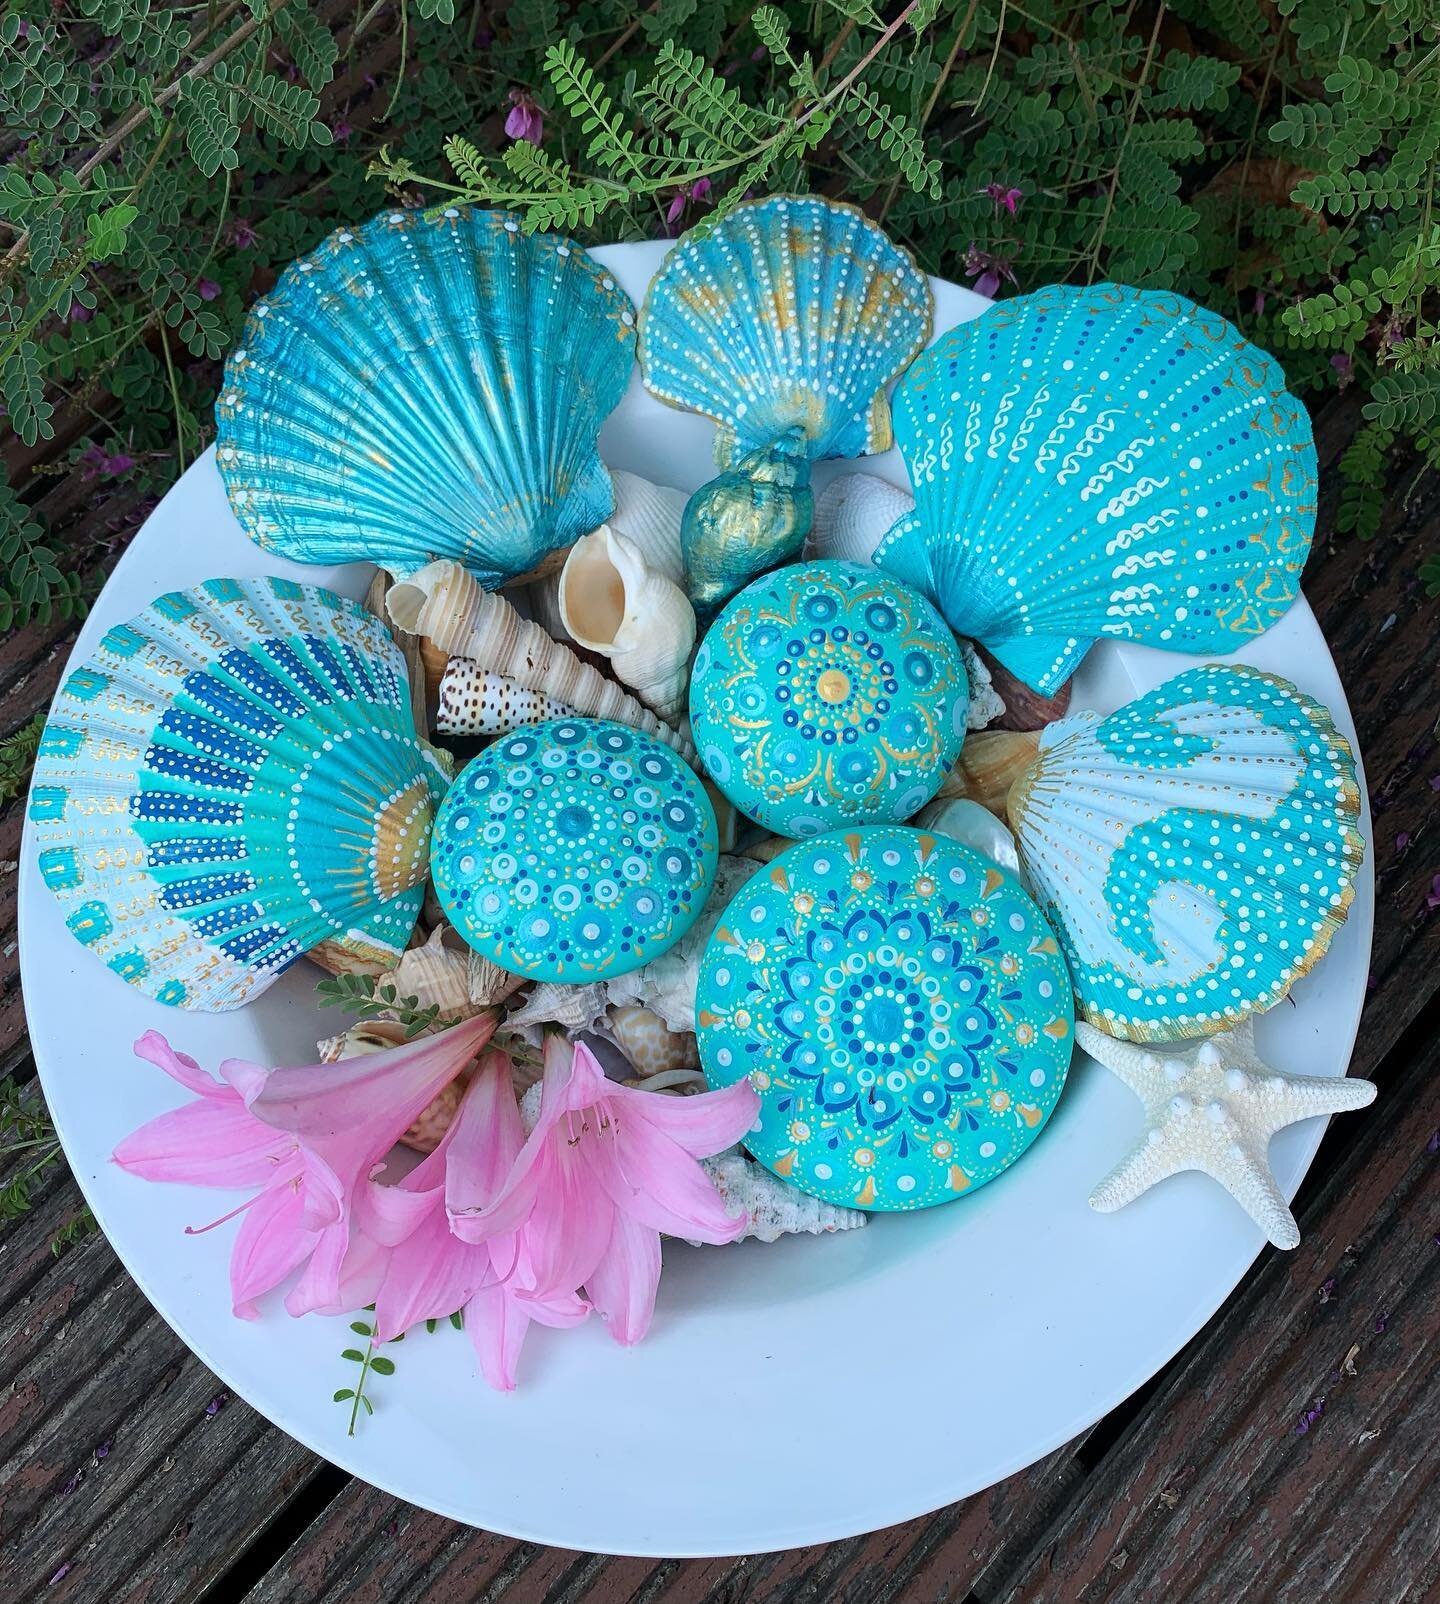 Here&rsquo;s a plate of turquoise, with a serving of our Jersey Lilies on the side ! 🌸 . Happy Friday everyone, enjoy the bank holiday weekend😊